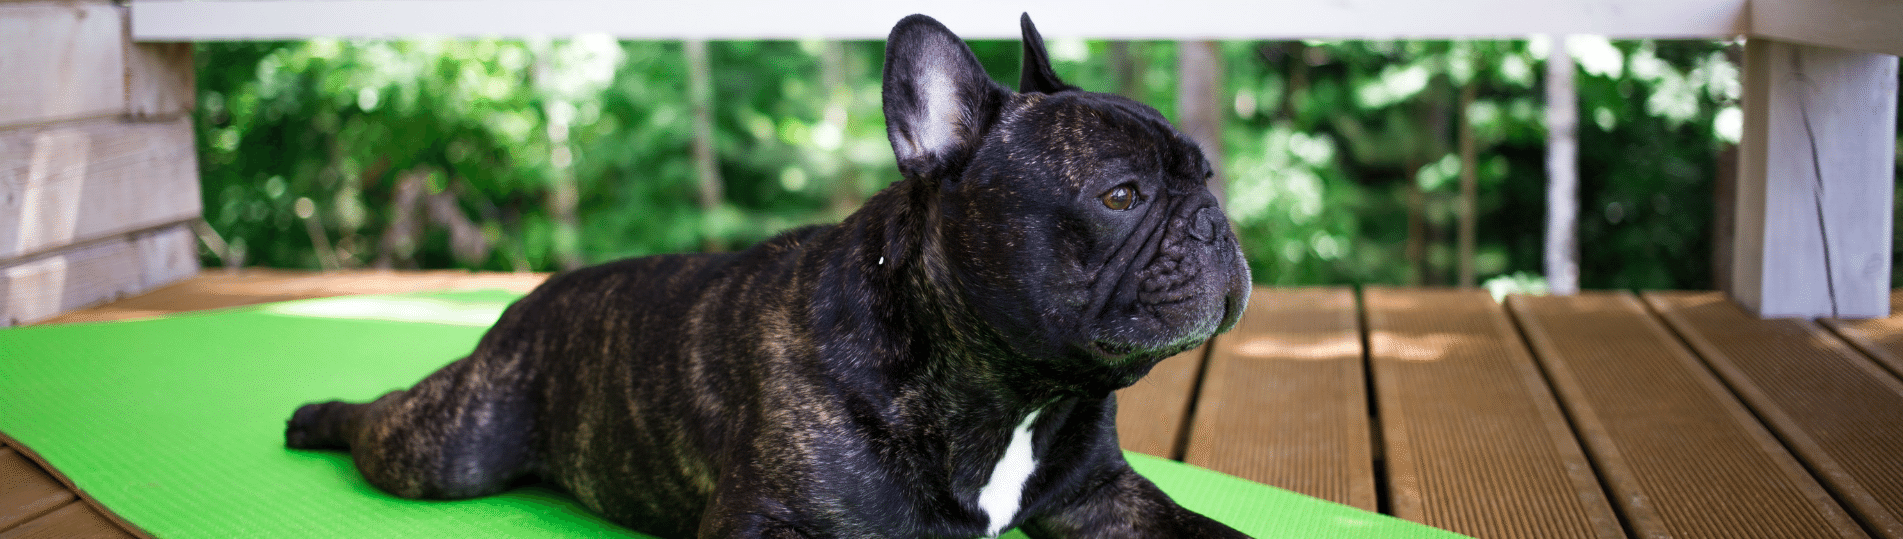 Black French Bulldog stretching out on a green yoga mat